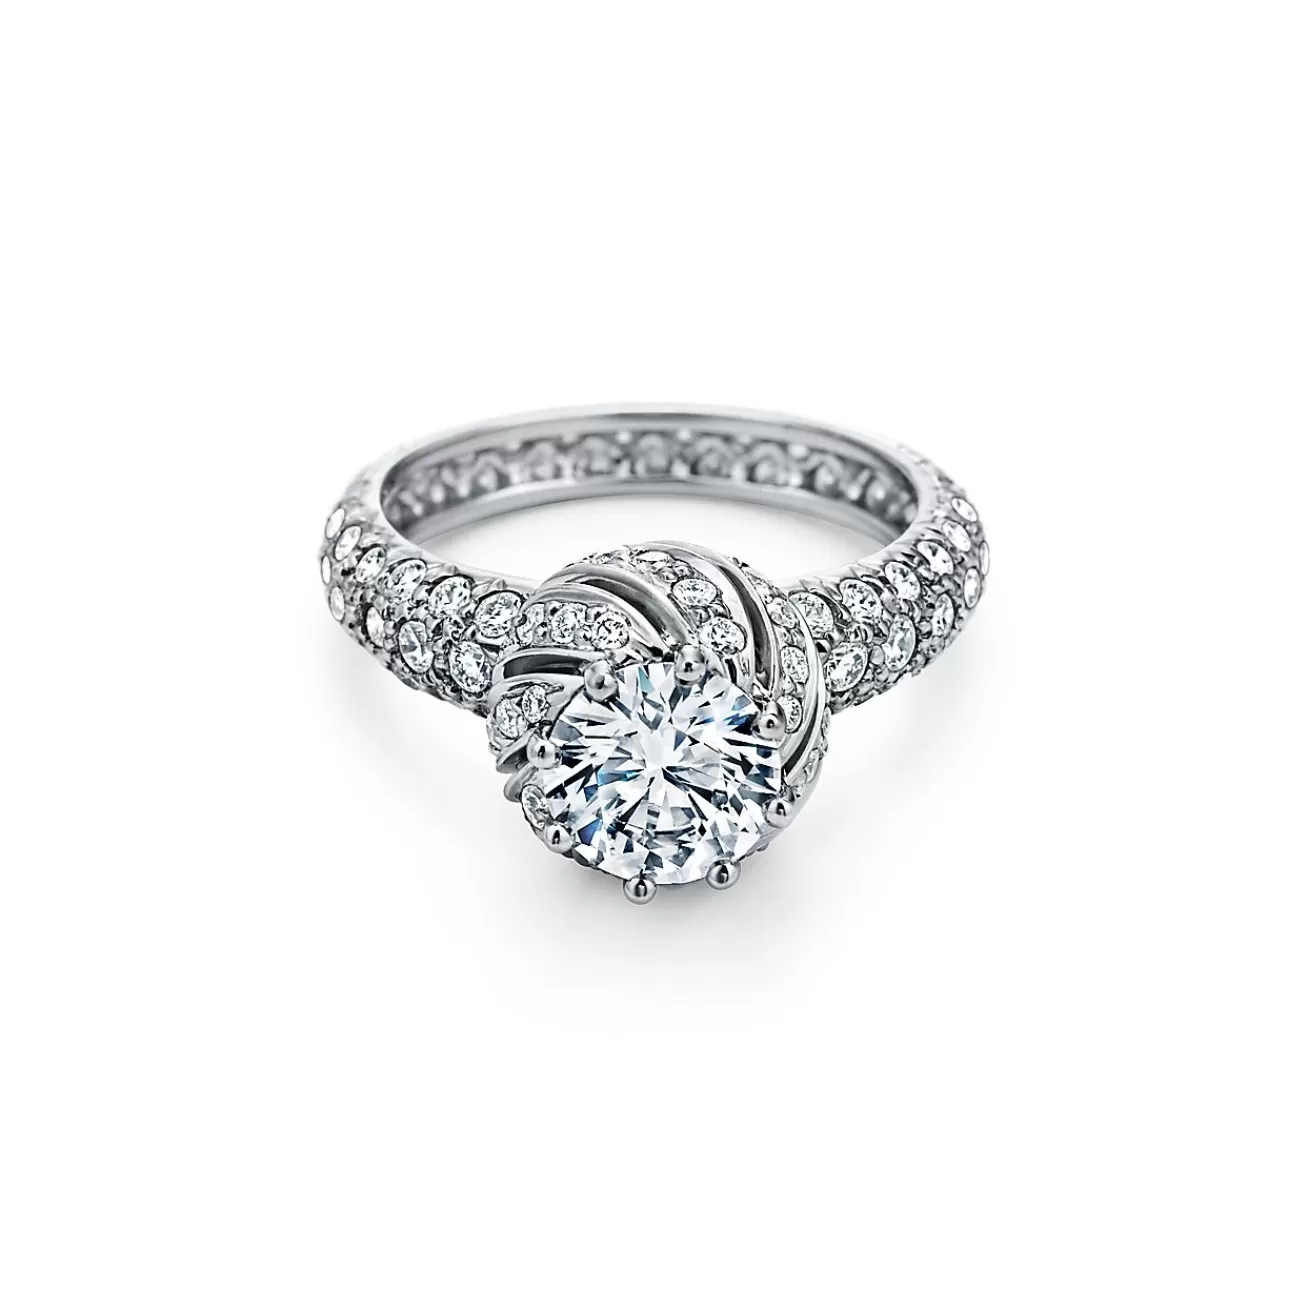 Tiffany & Co. Schlumberger by ™ Buds engagement ring with a diamond platinum band | ^ Jean Schlumberger by Tiffany | Engagement Rings